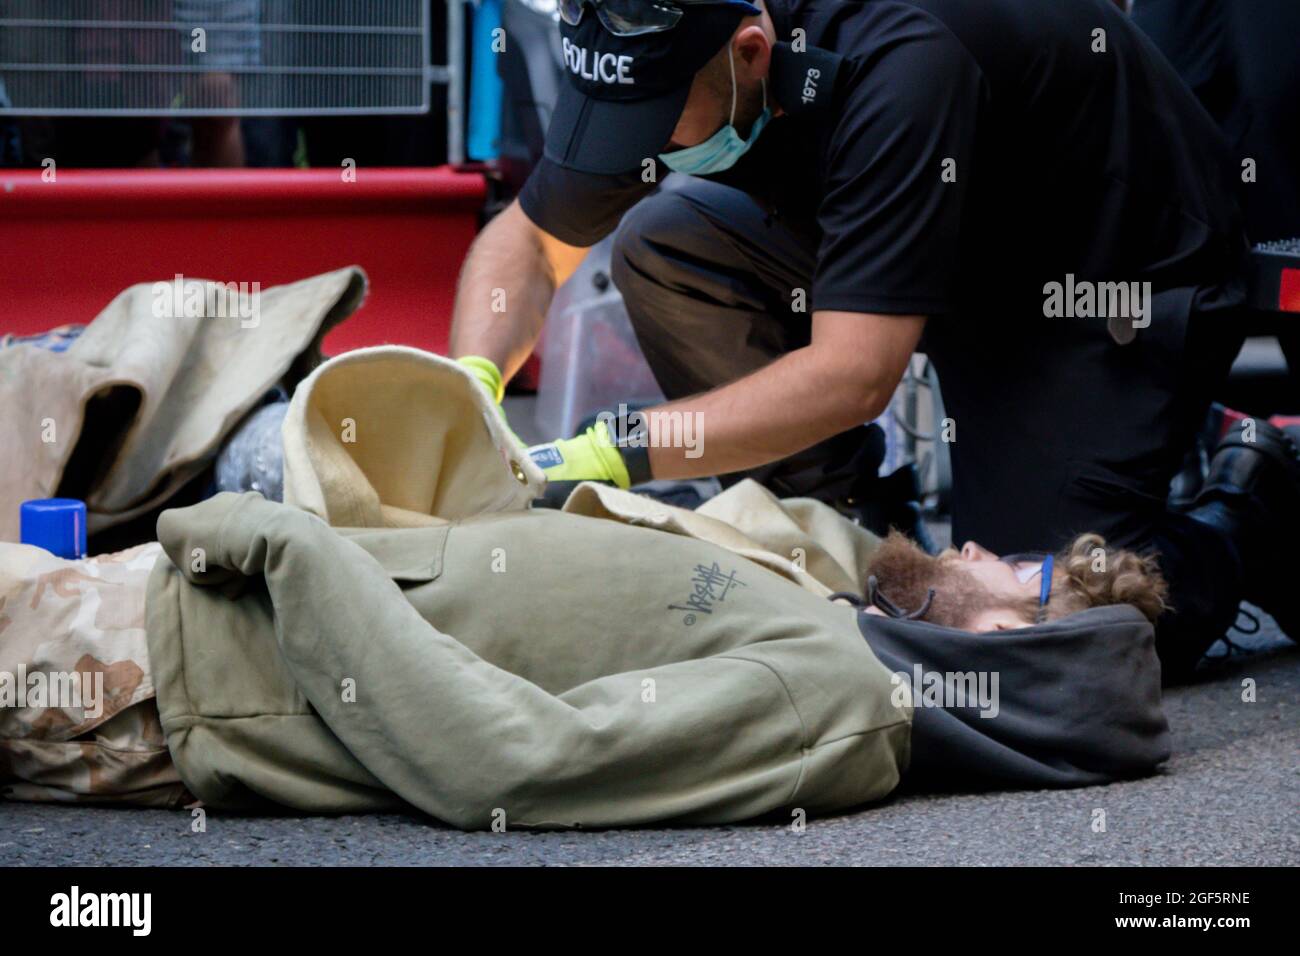 London, United Kingdom, 21st August 2021:- Specialist police officers use cutting equipment to remove Extinction Rebellion protesters from a metal pip Stock Photo